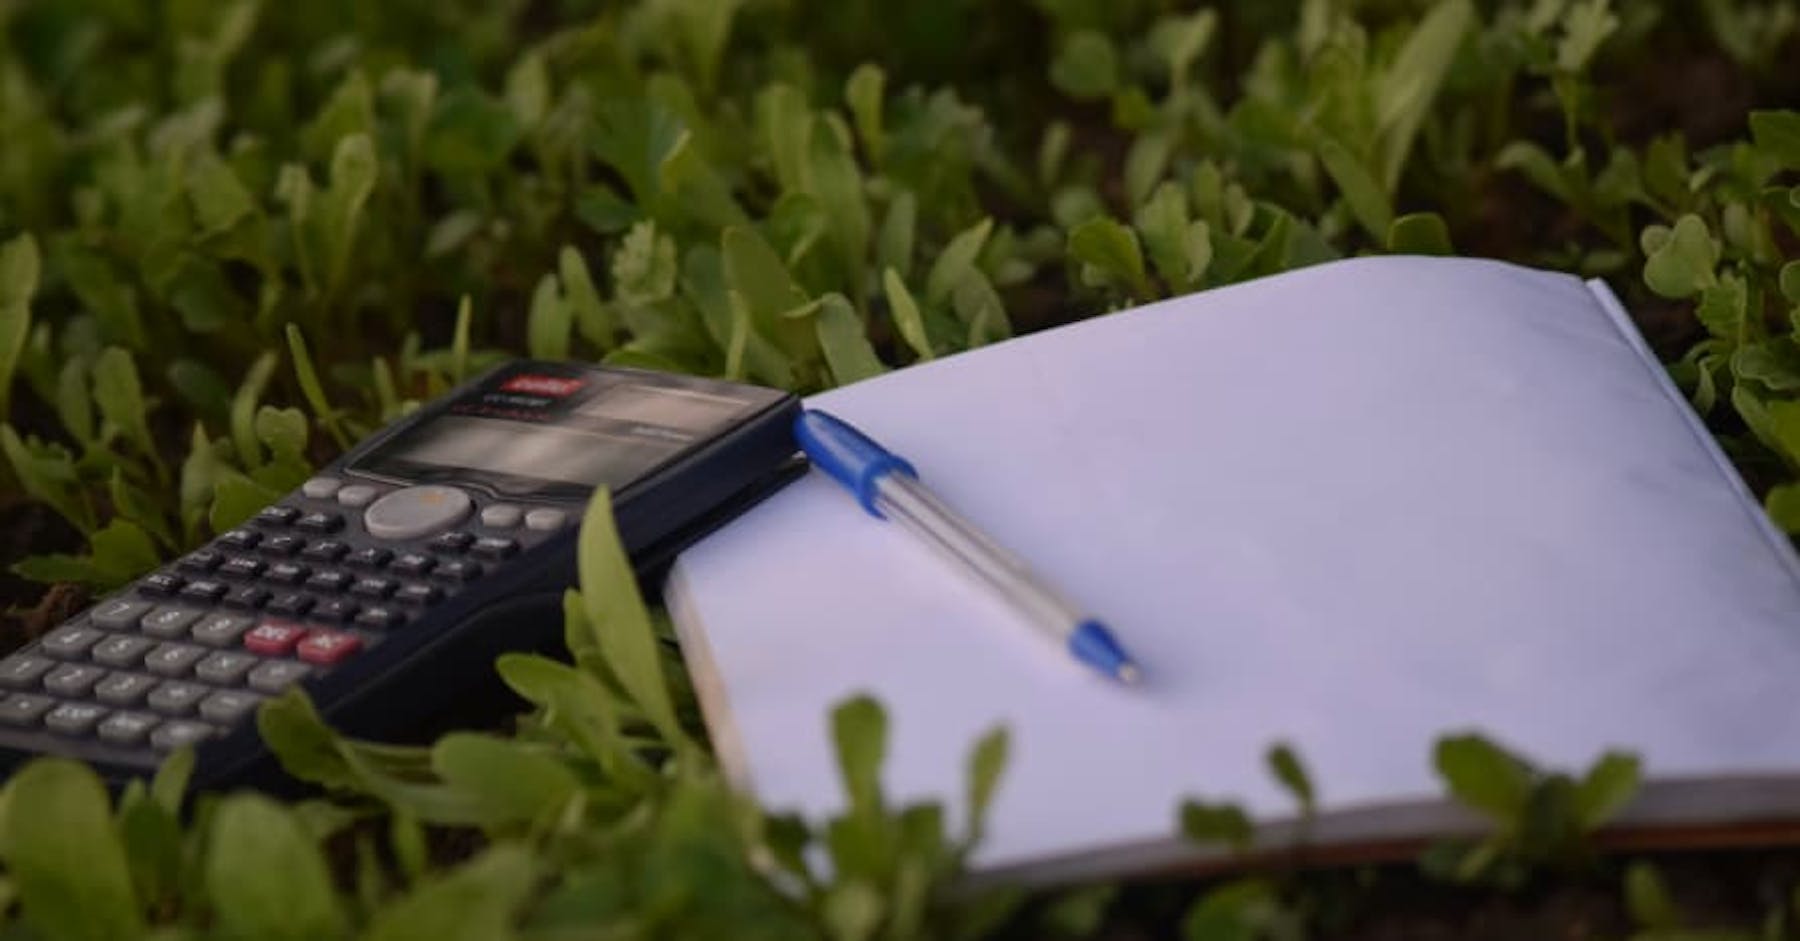 calculator and notebook with pen on grass